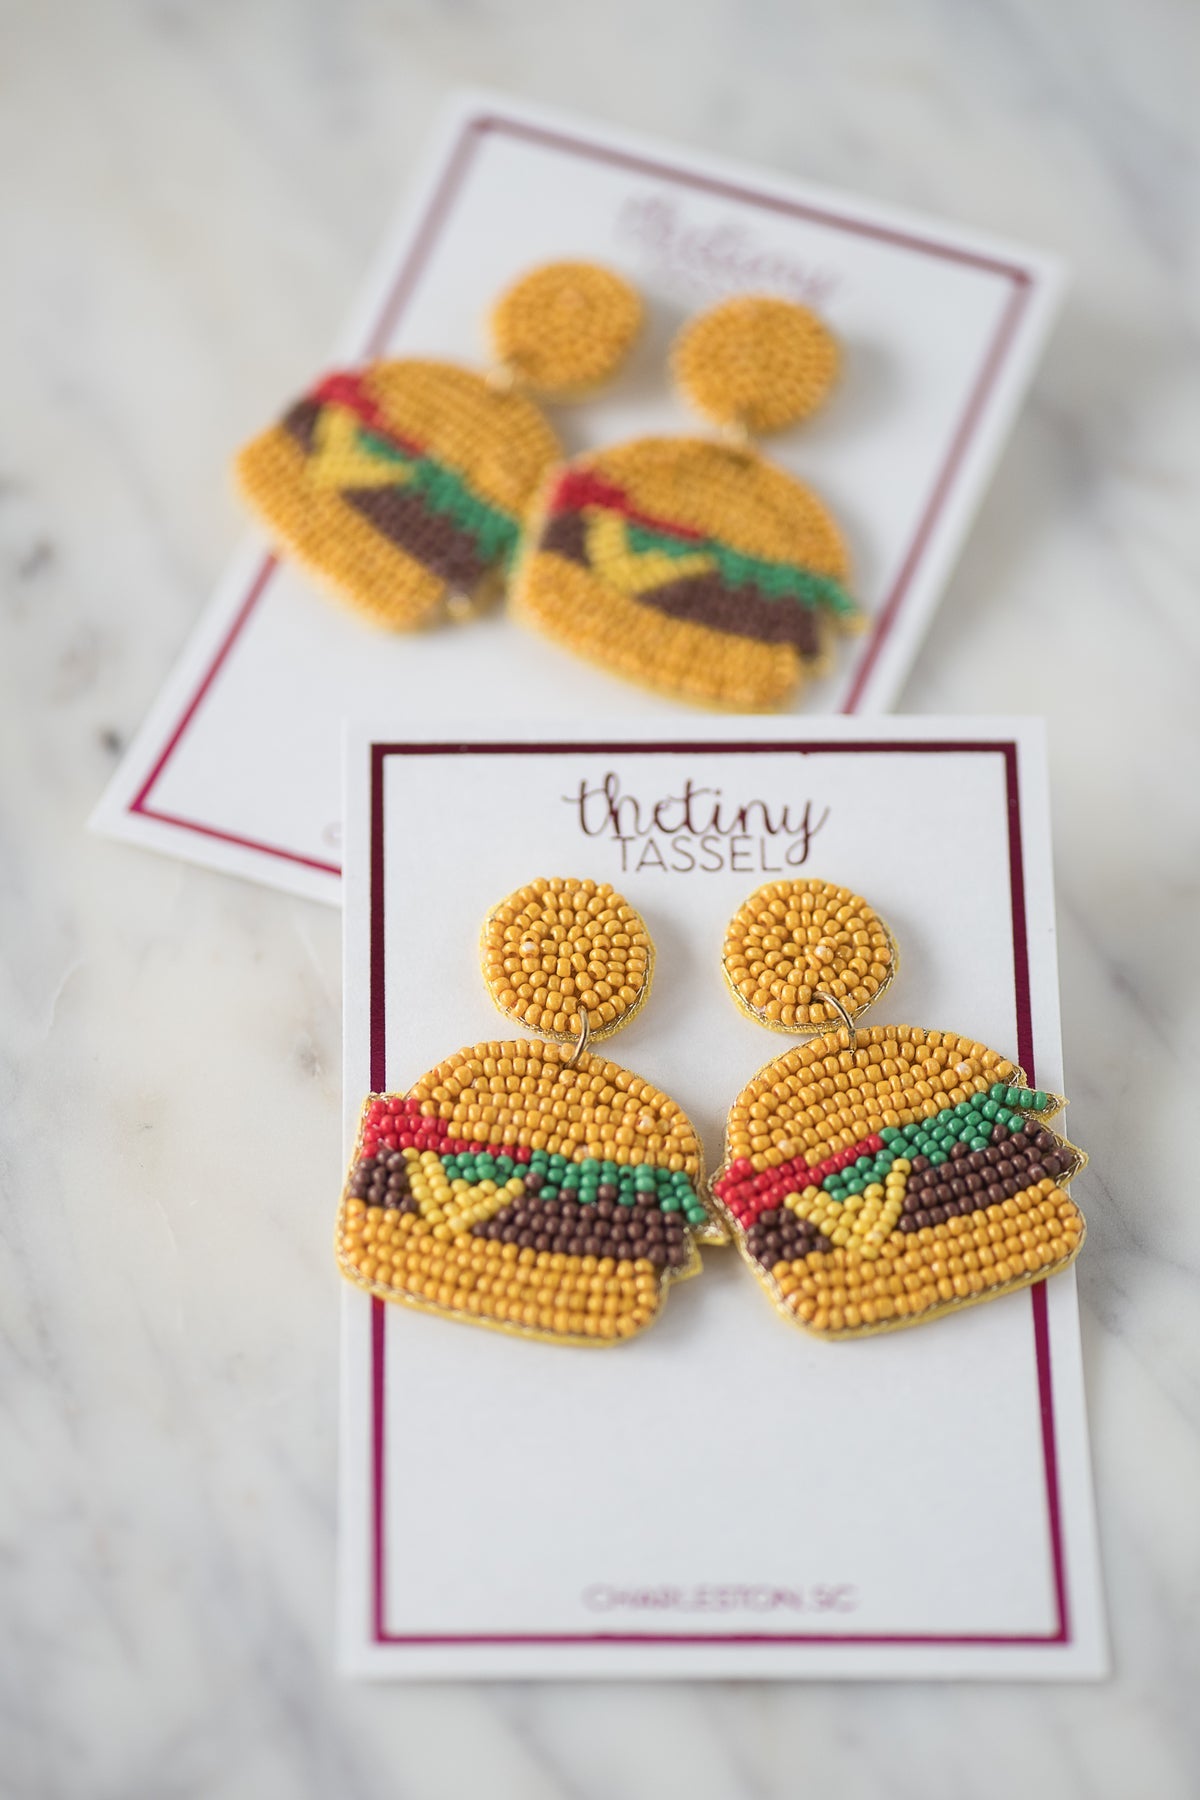 the large cheeseburger statement earrings